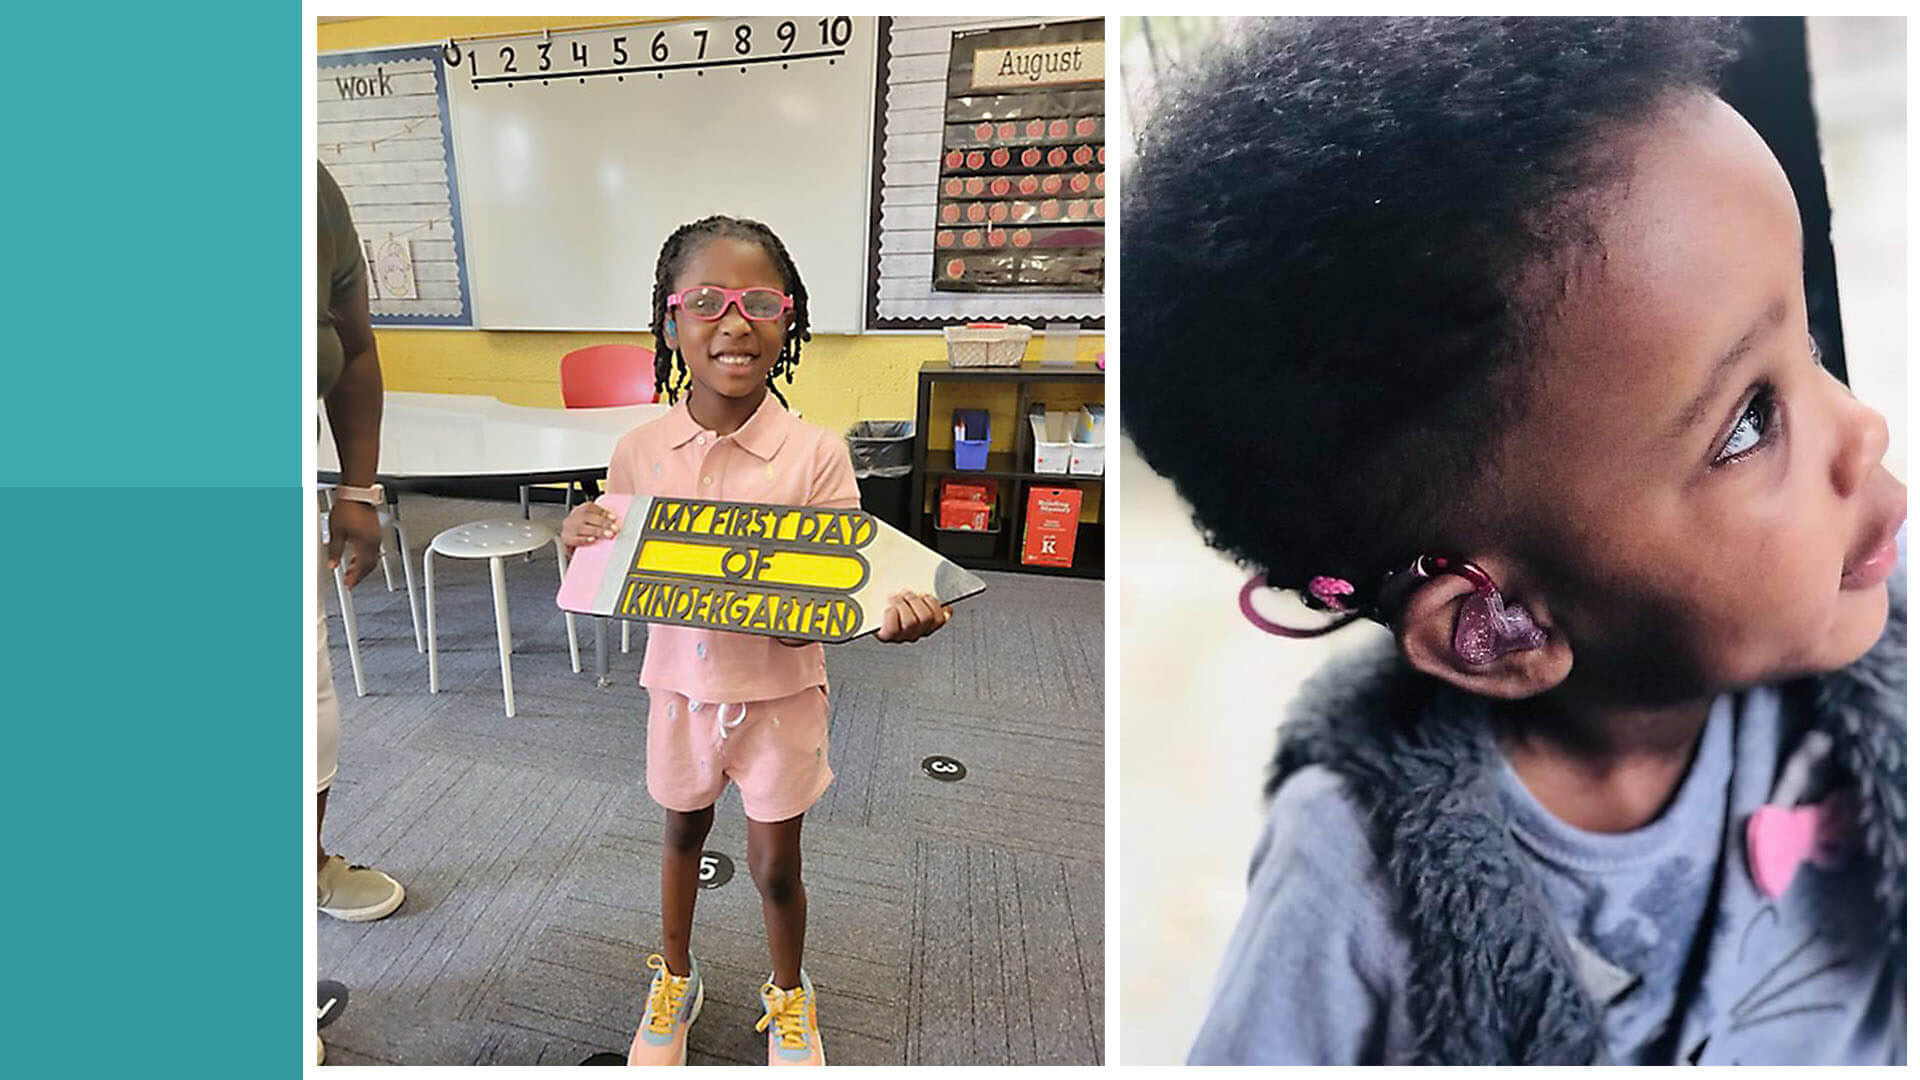 A collage of a small child with her head turned to the right wearing a hearing assistance device in her ear on the right and the same child at her first day of kindergarten on the left.